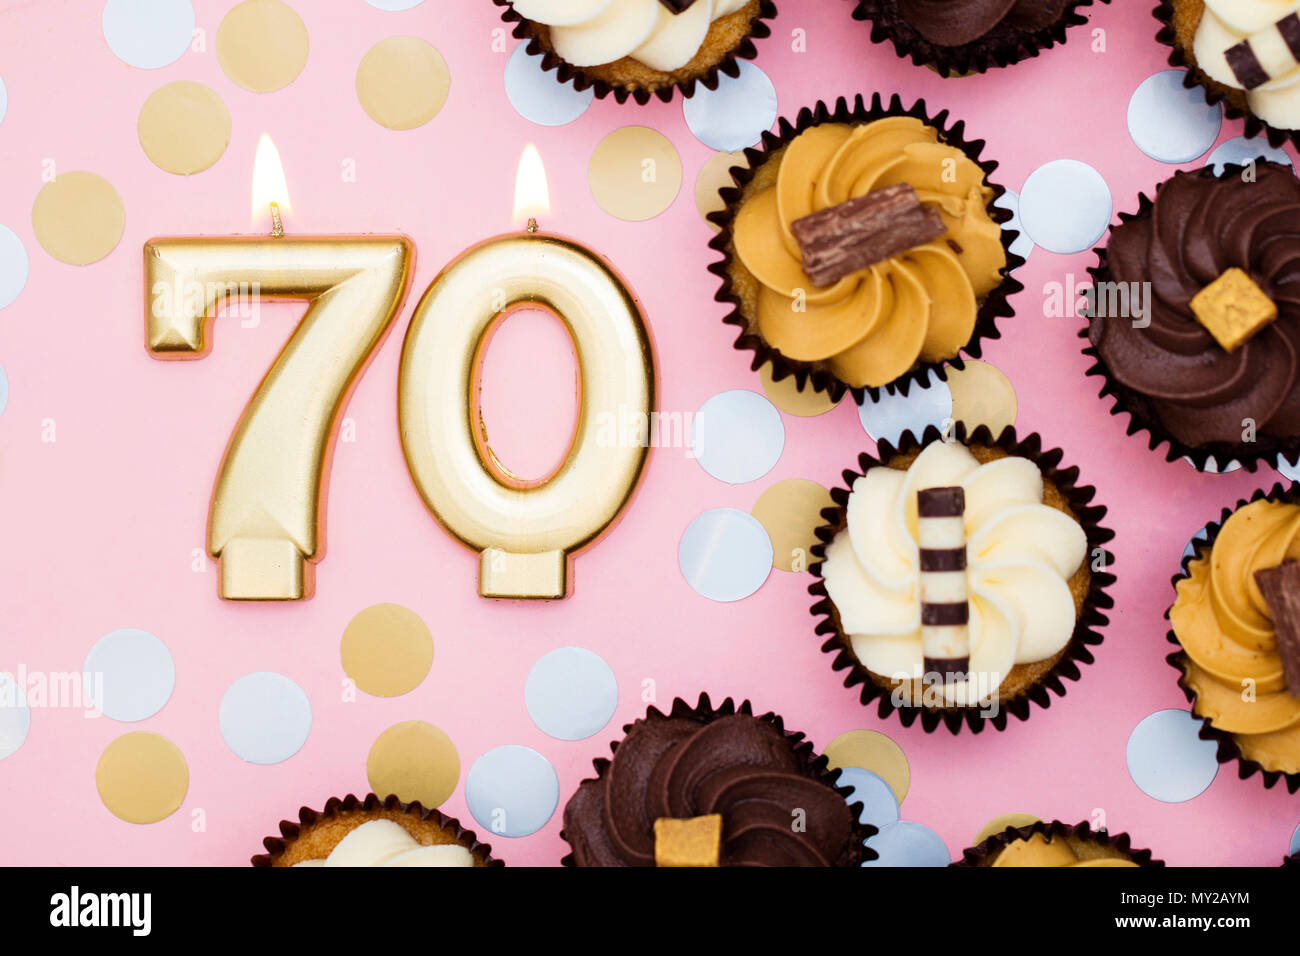 Number 70 gold candle with cupcakes against a pastel pink background Stock Photo